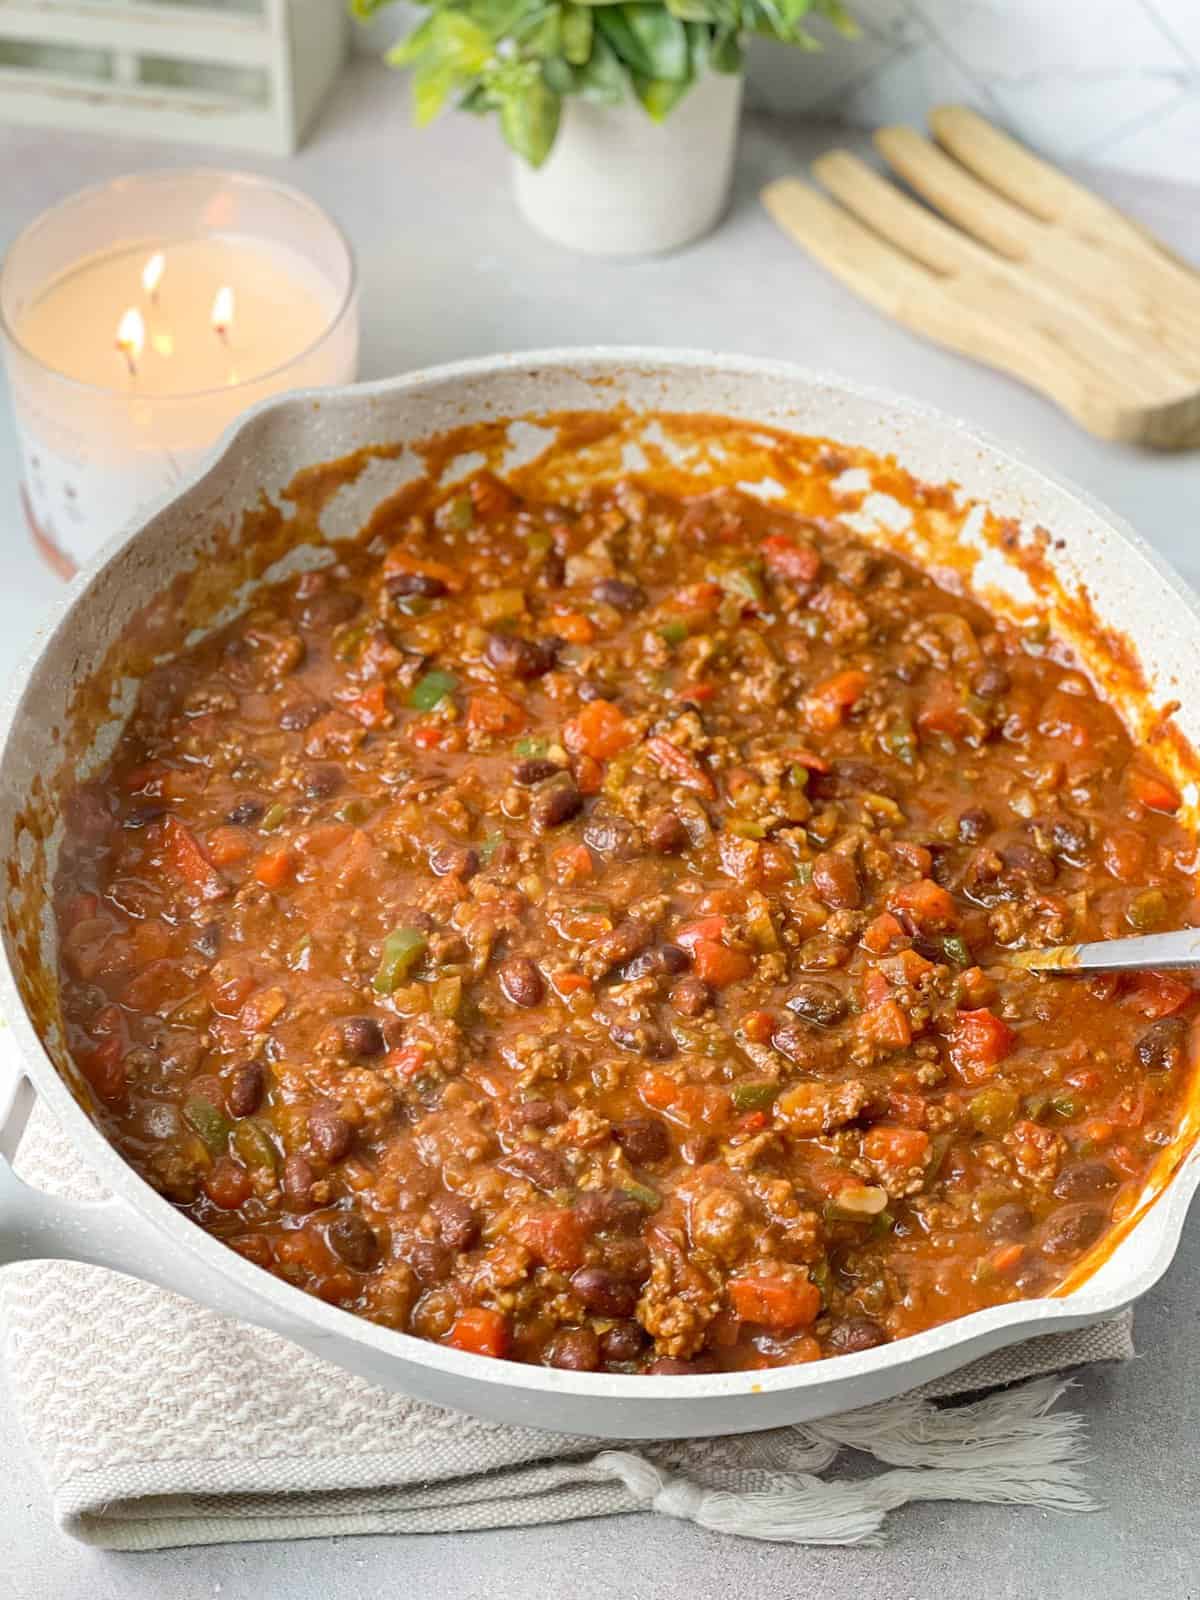 TasteGreatFoodie - Classic Thick Hearty Chili - Main Dish